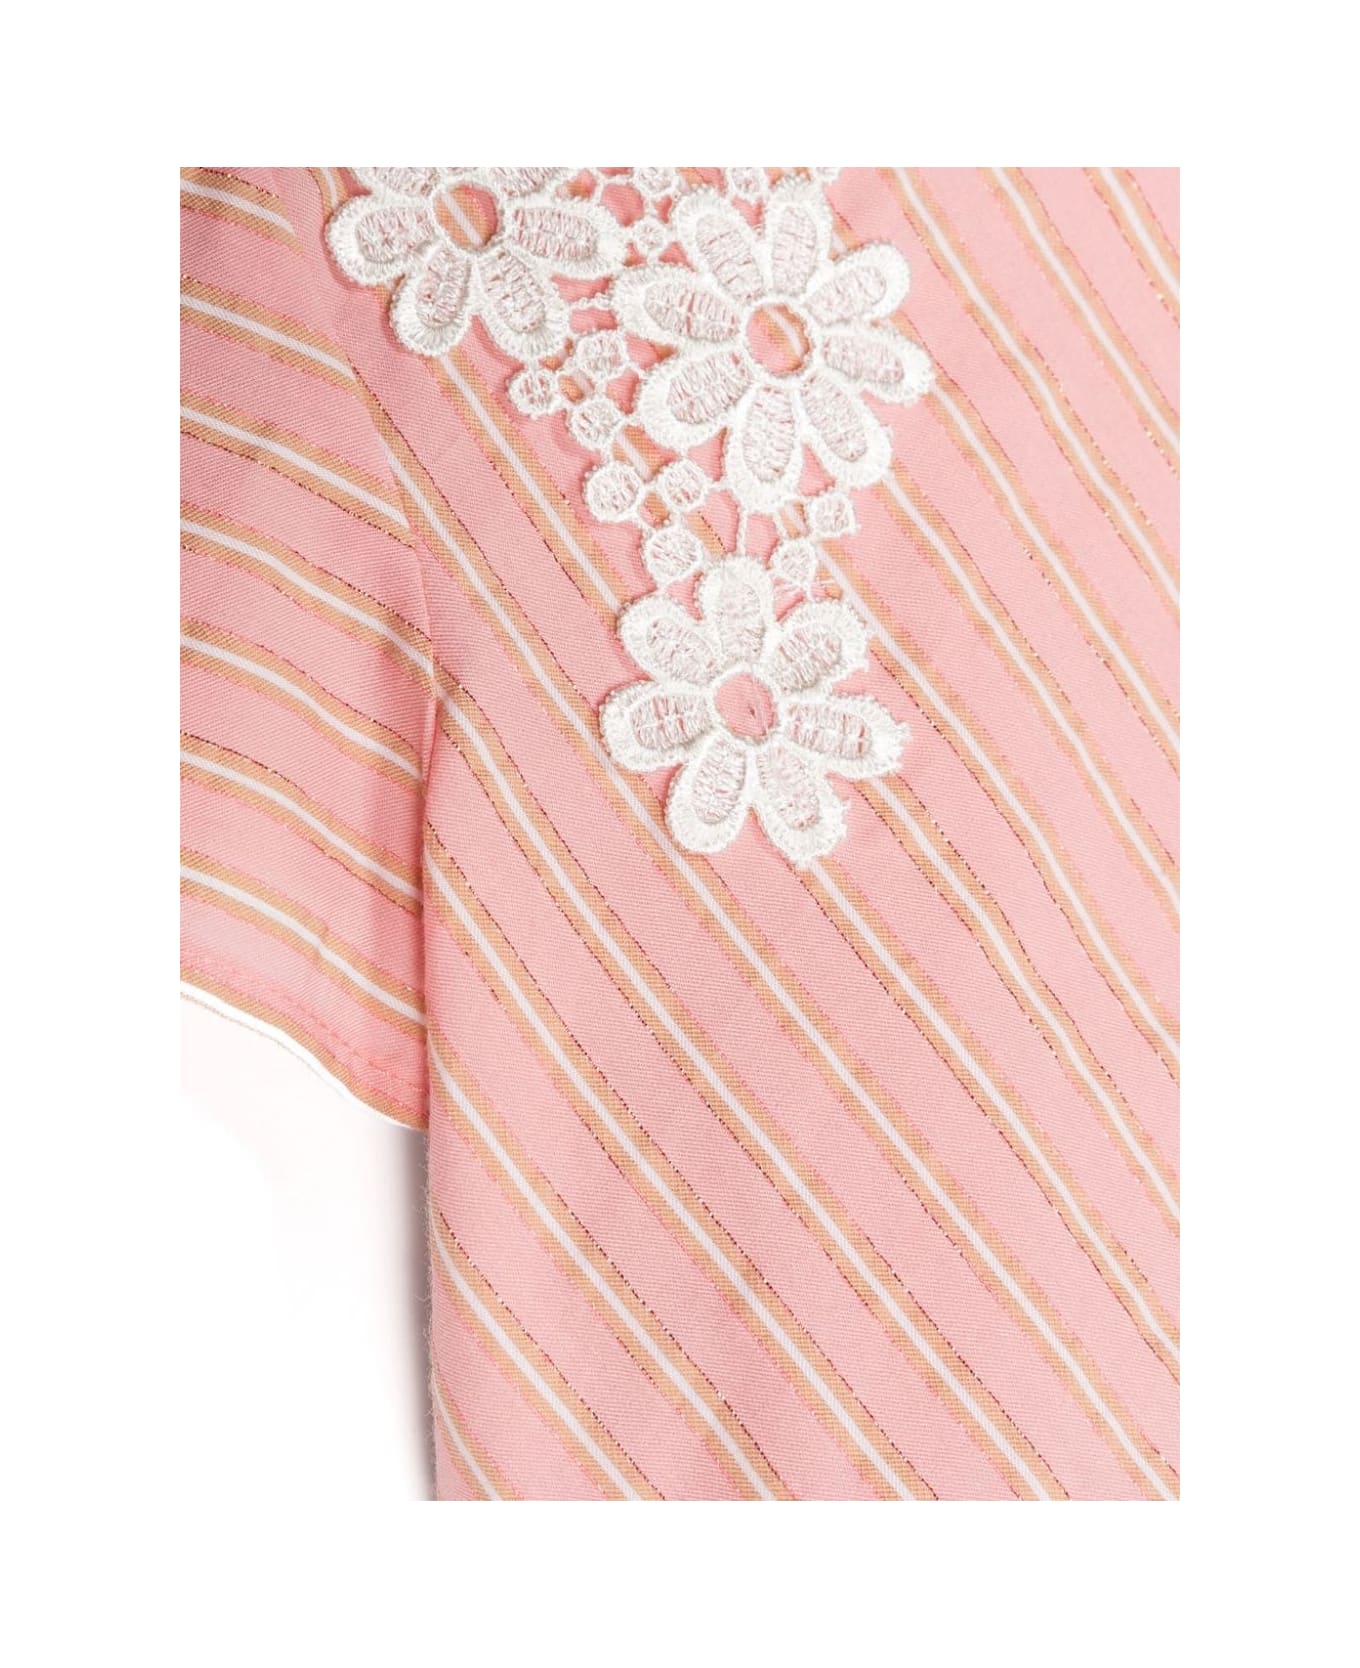 Simonetta Pink Lamé Striped Shirt With Lace - Pink シャツ